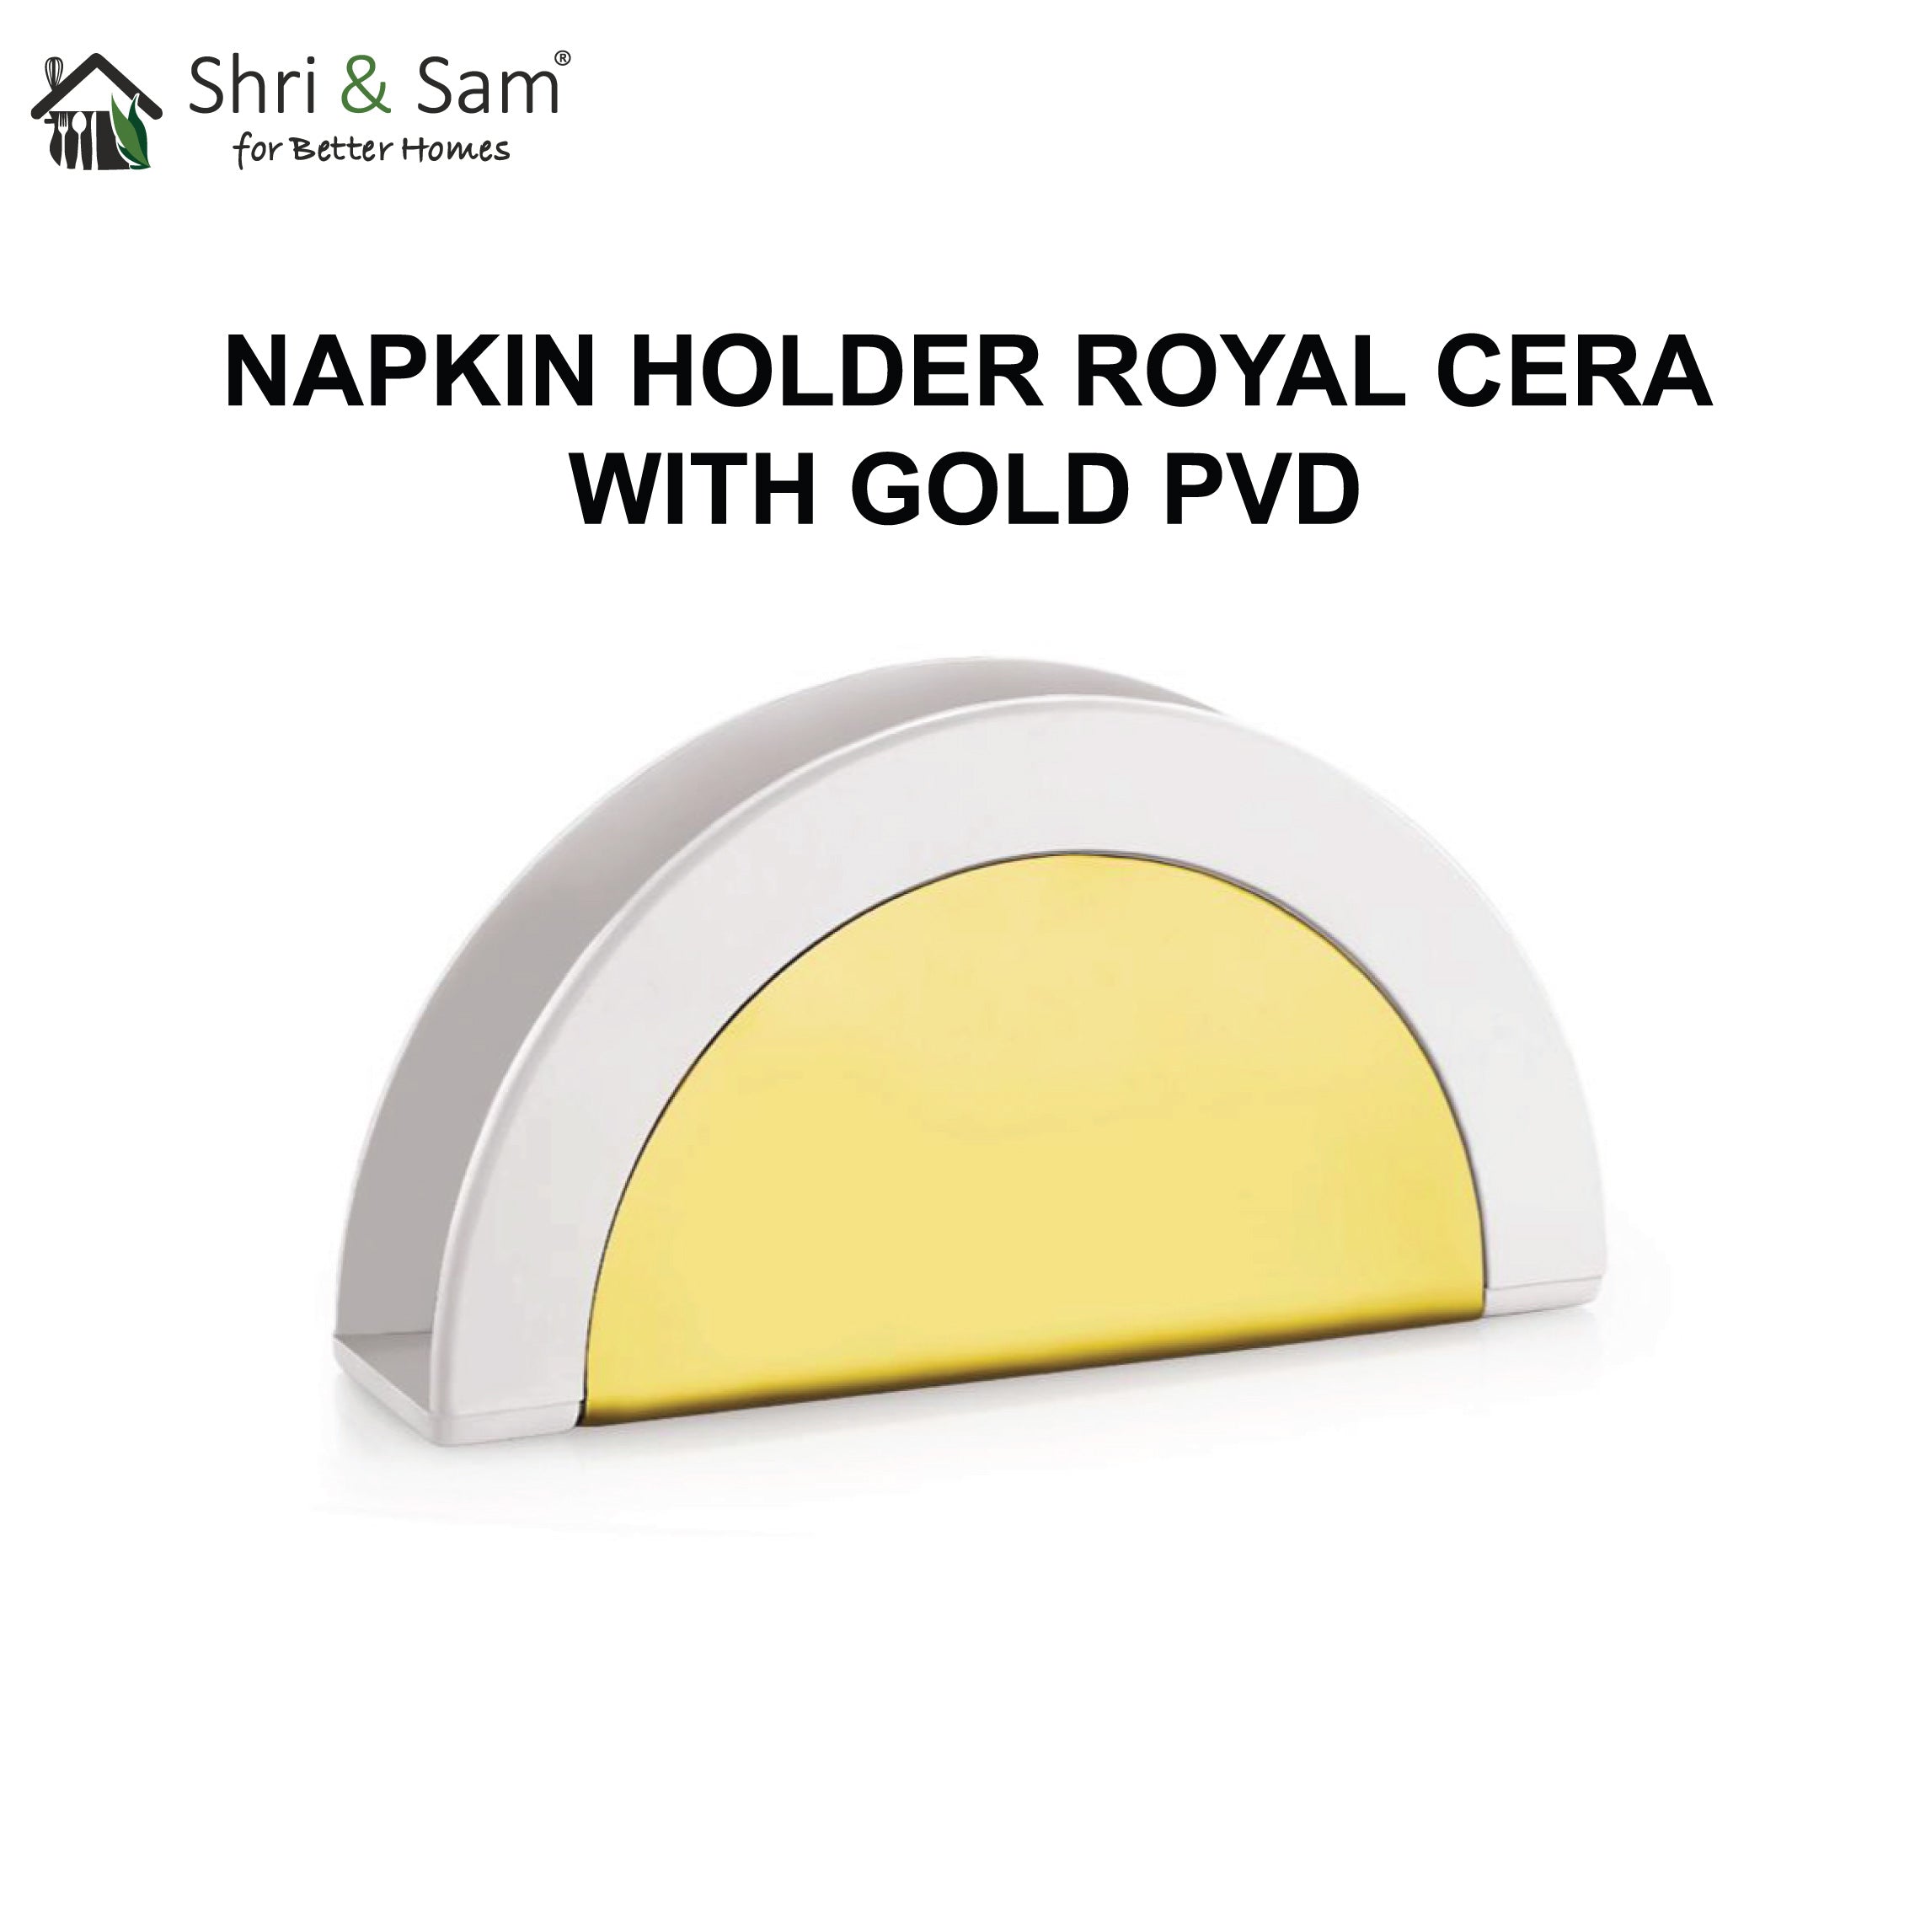 Stainless Steel Royal Swiss Napkin Holder with Gold PVD Coating